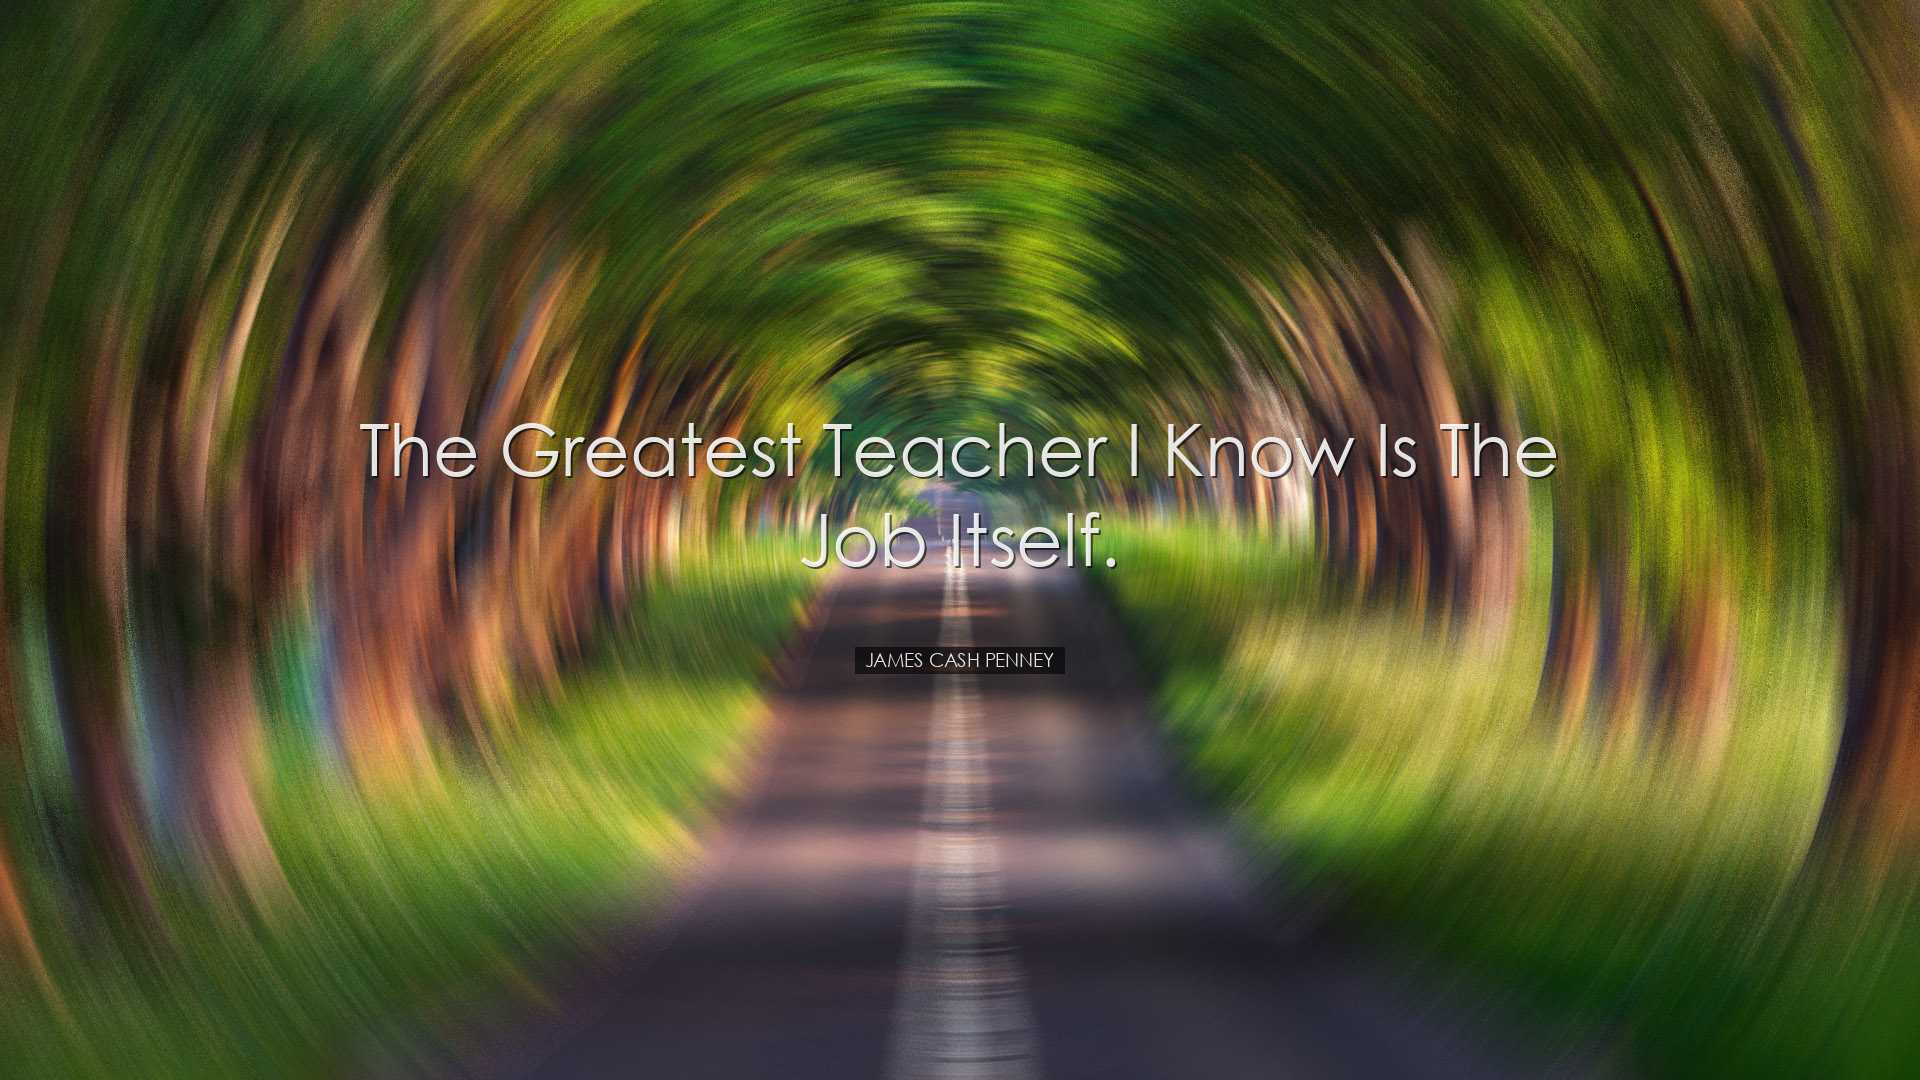 The greatest teacher I know is the job itself. - James Cash Penney